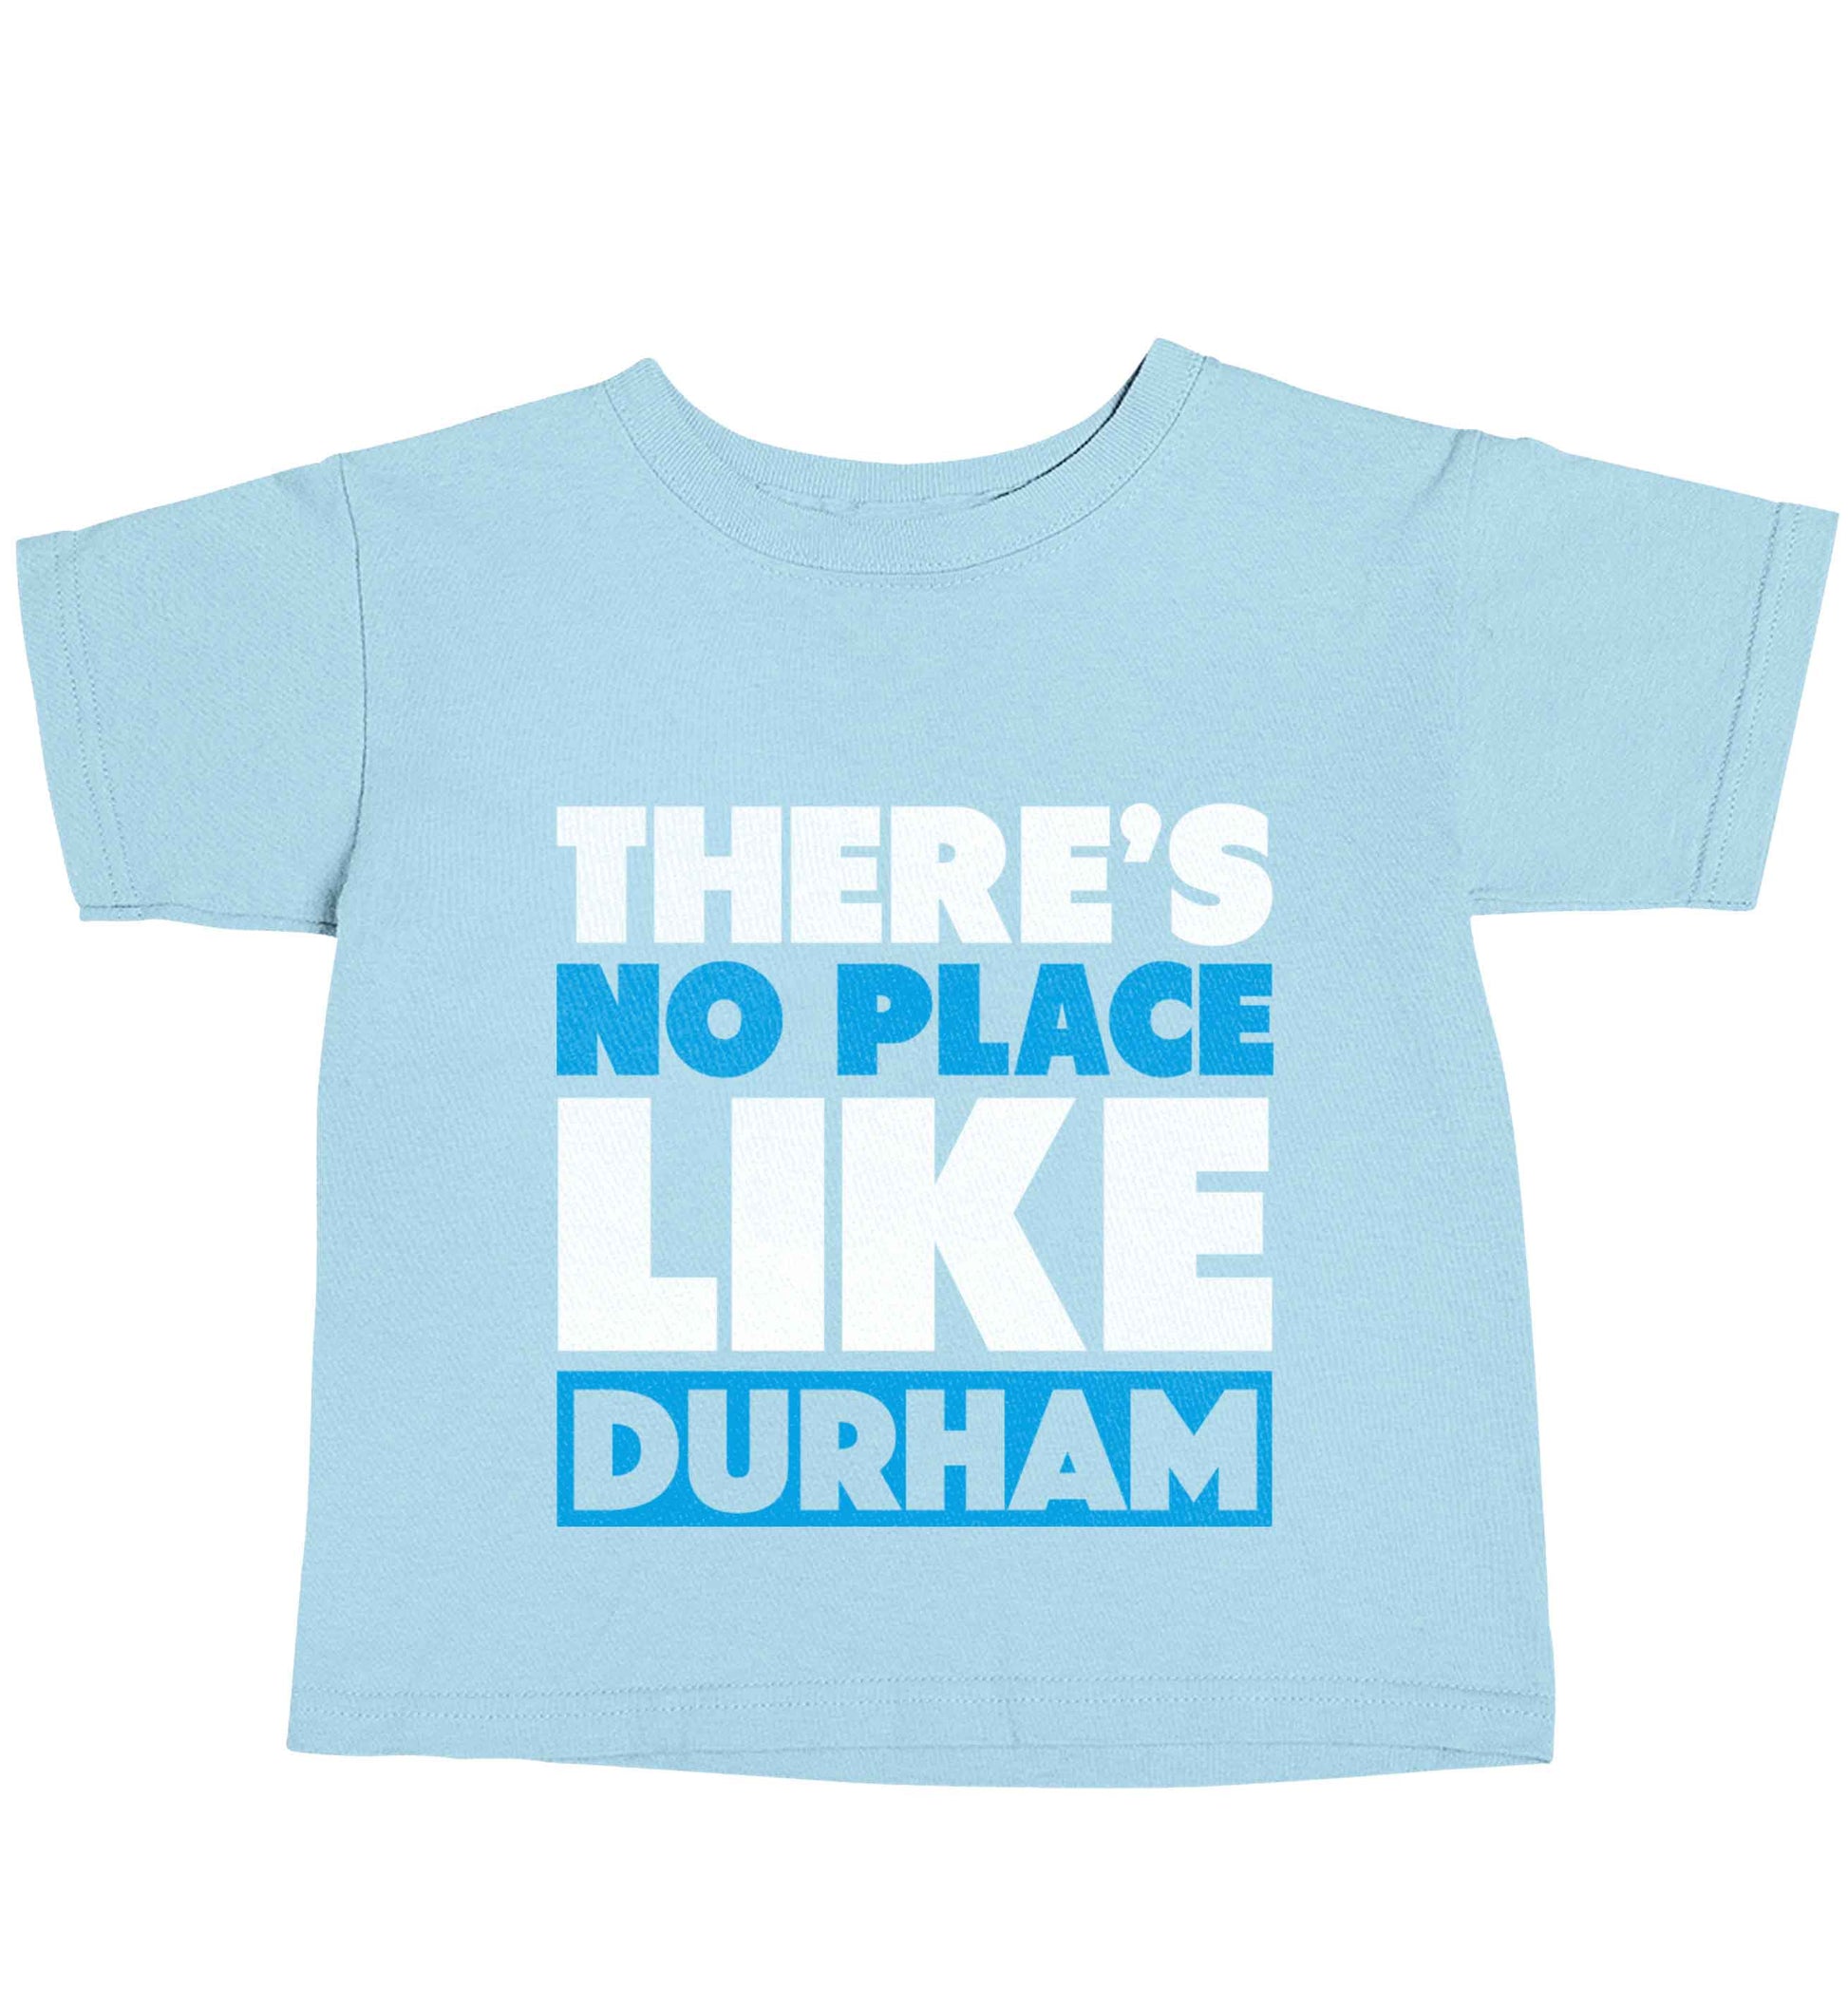 There's no place like Durham light blue baby toddler Tshirt 2 Years